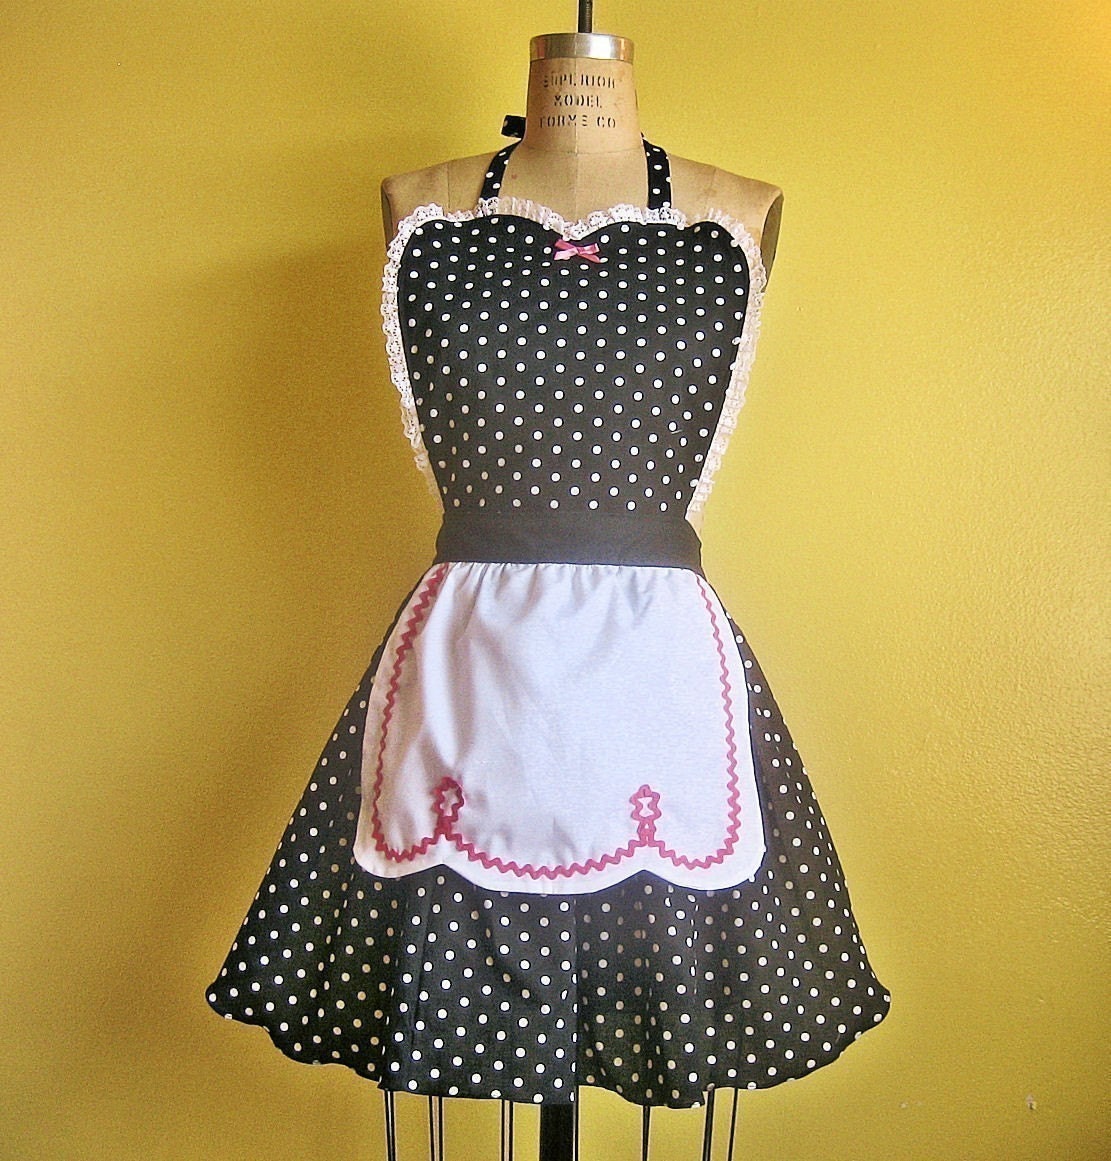 Retro 50s BLACK POLKA DOT full APRON with fifties ric rac details make a sexy hostess and is vintage inspired